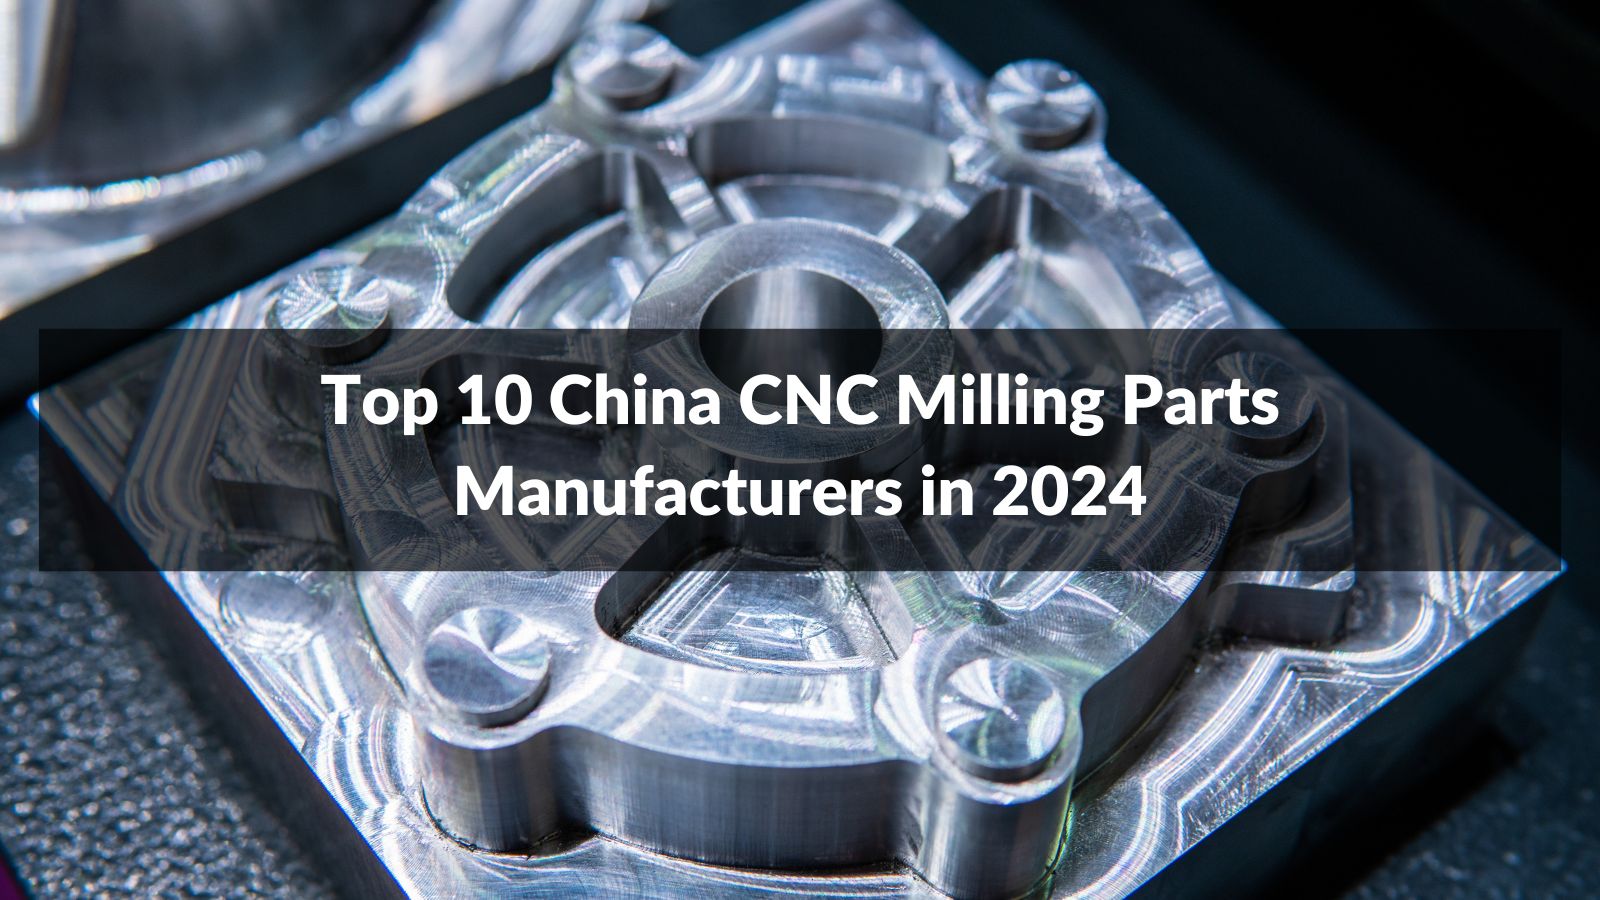 Top 10 China CNC Milling Parts Manufacturers in 2024